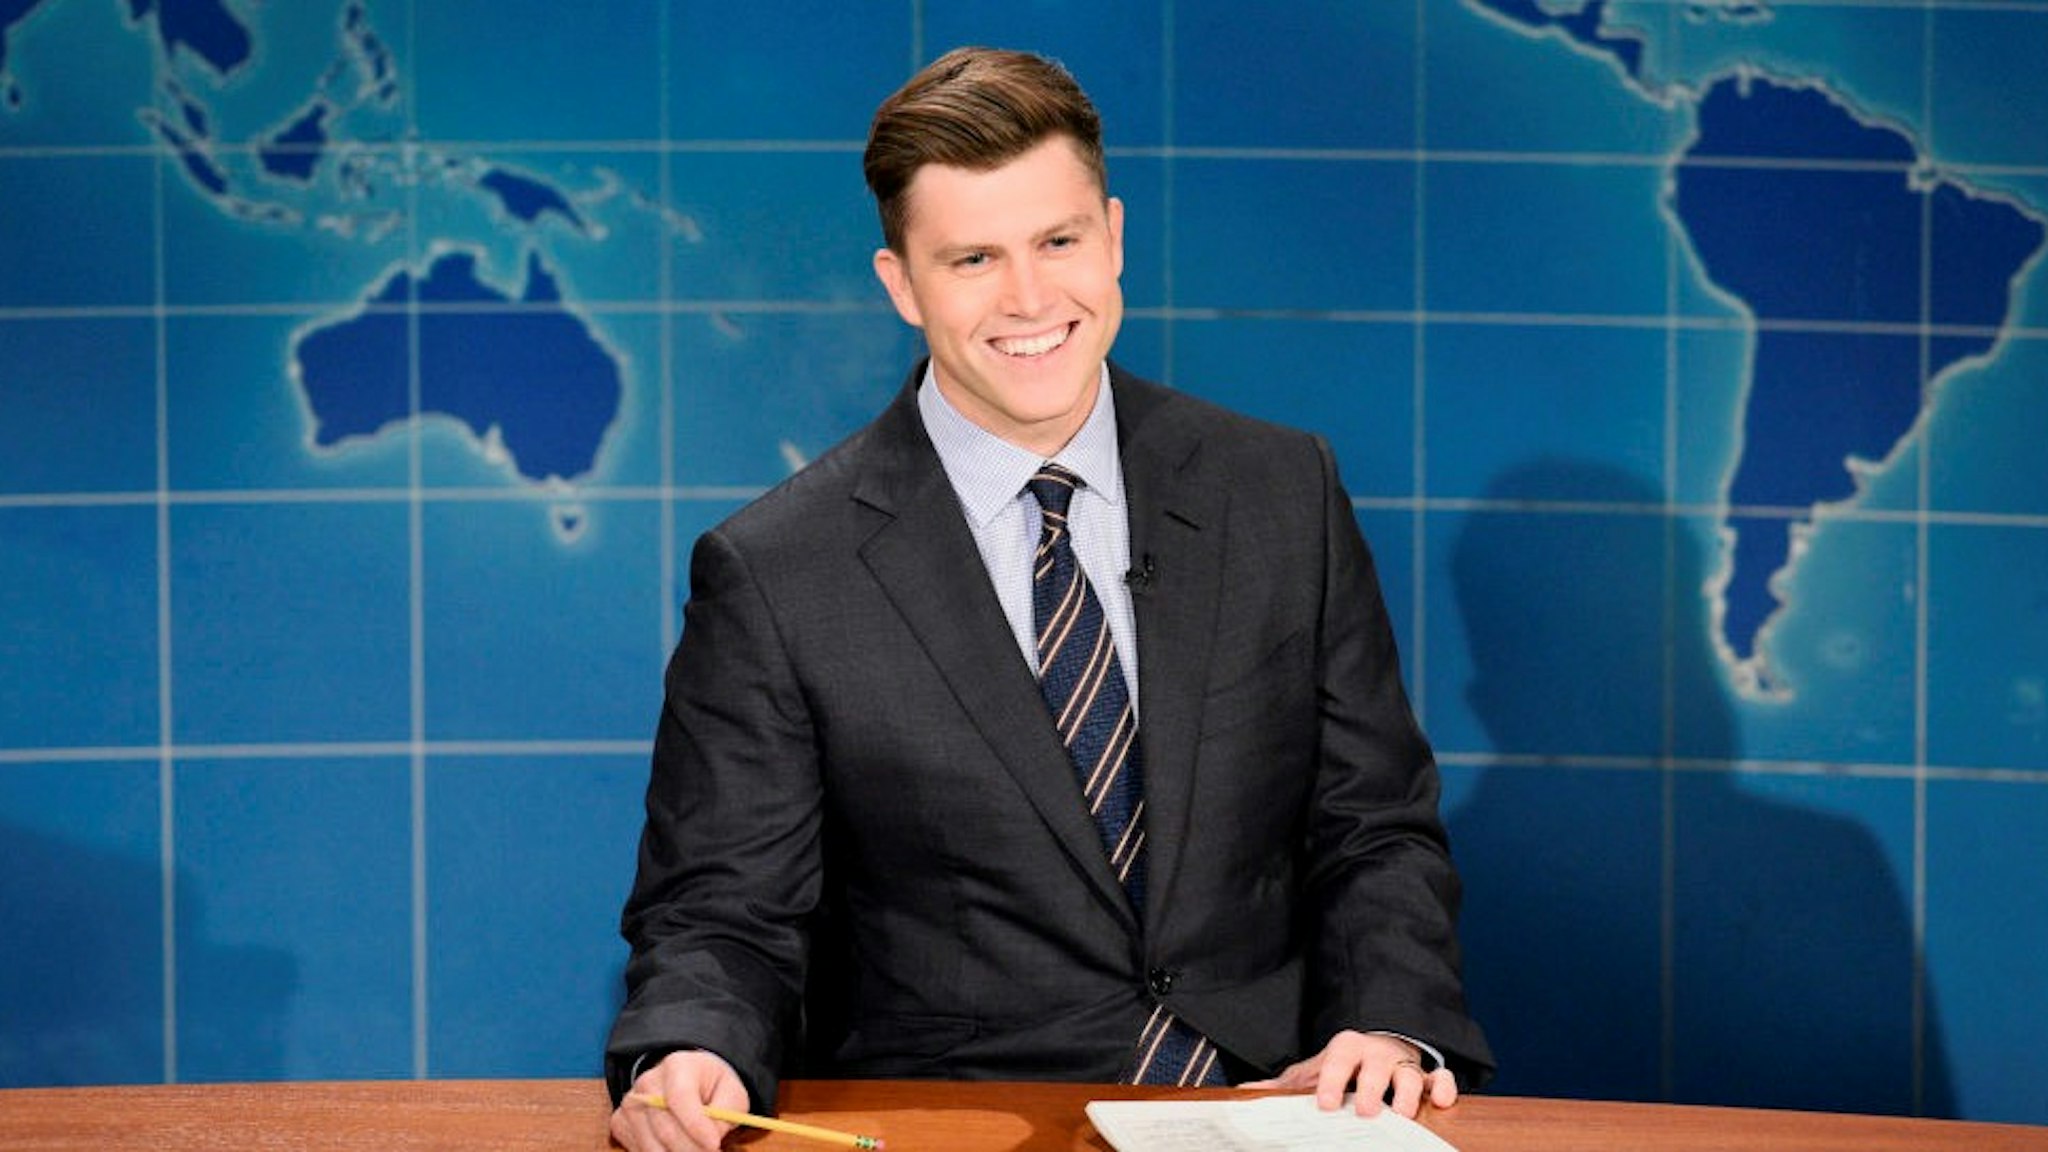 SATURDAY NIGHT LIVE -- "John Mulaney" Episode 1790 -- Pictured: Anchor Colin Jost during Weekend Update on Saturday, October 31, 2020 -- (Photo by: